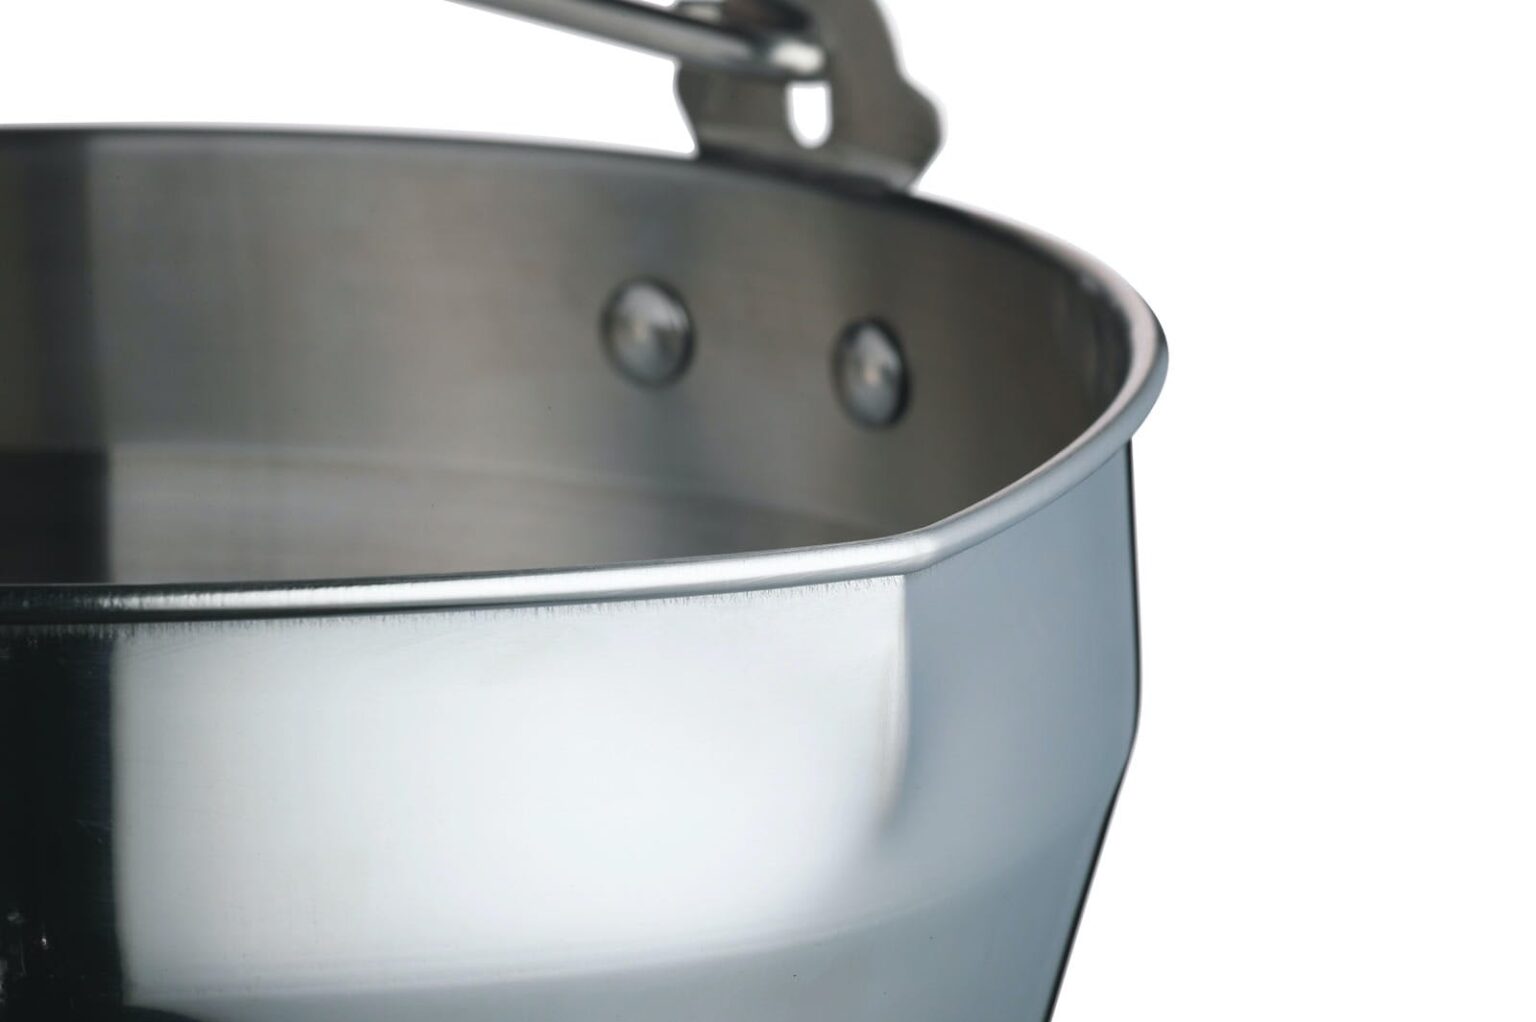 LARGE 9 LITRE STAINLESS STEEL MASLIN PAN - Woodbridge Kitchen Company Large Stainless Steel Dish Pan